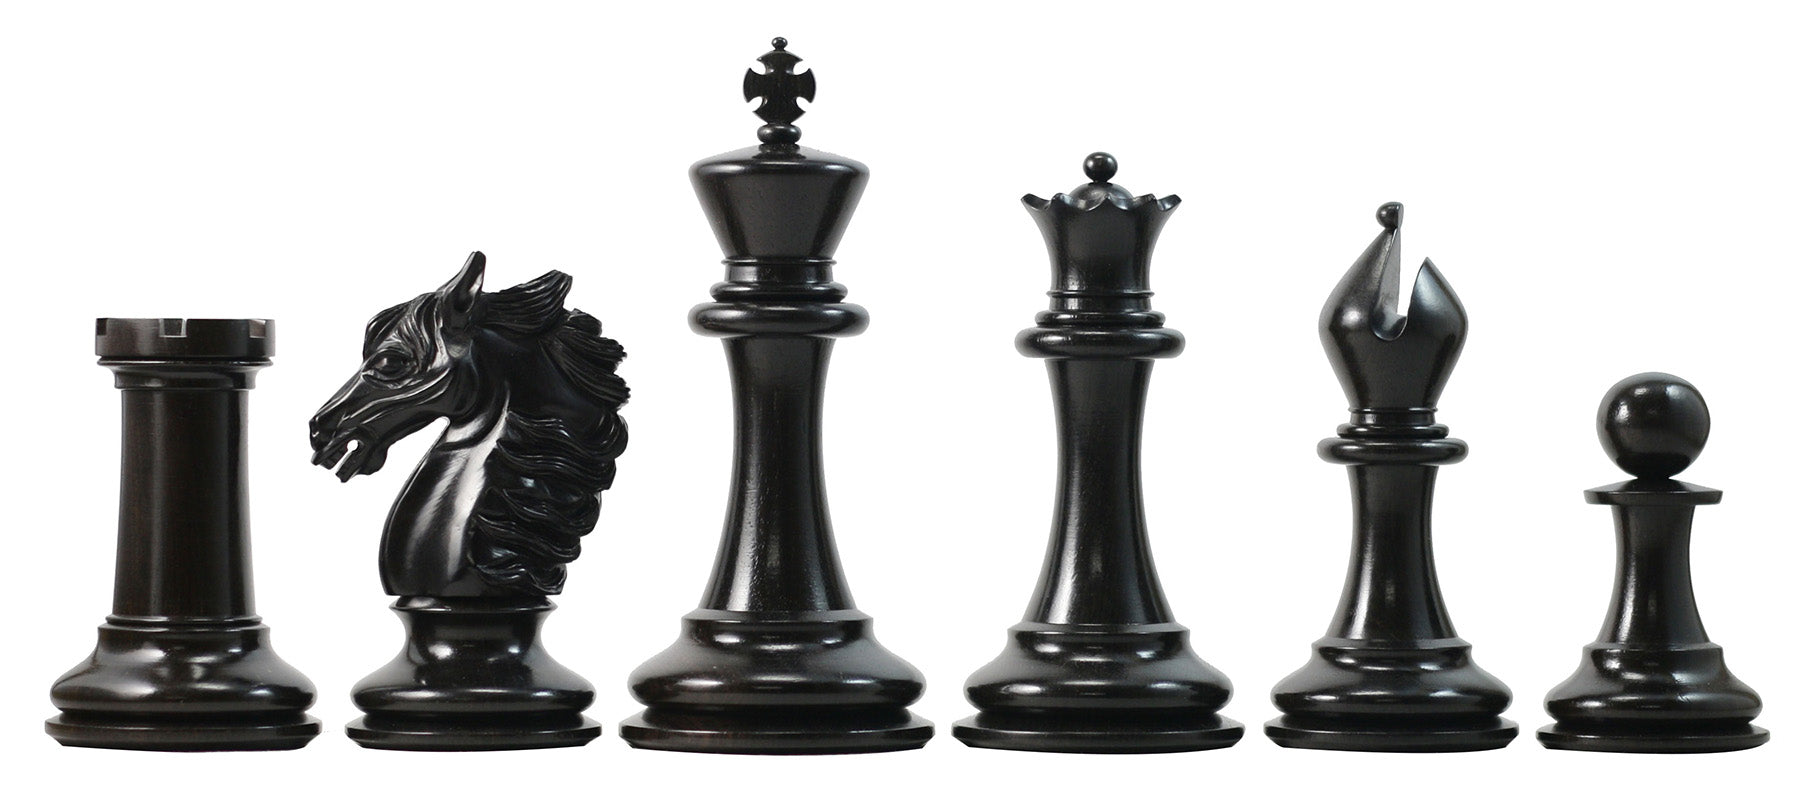 The Victoria Series Luxury Chess Table & Master Series Chess